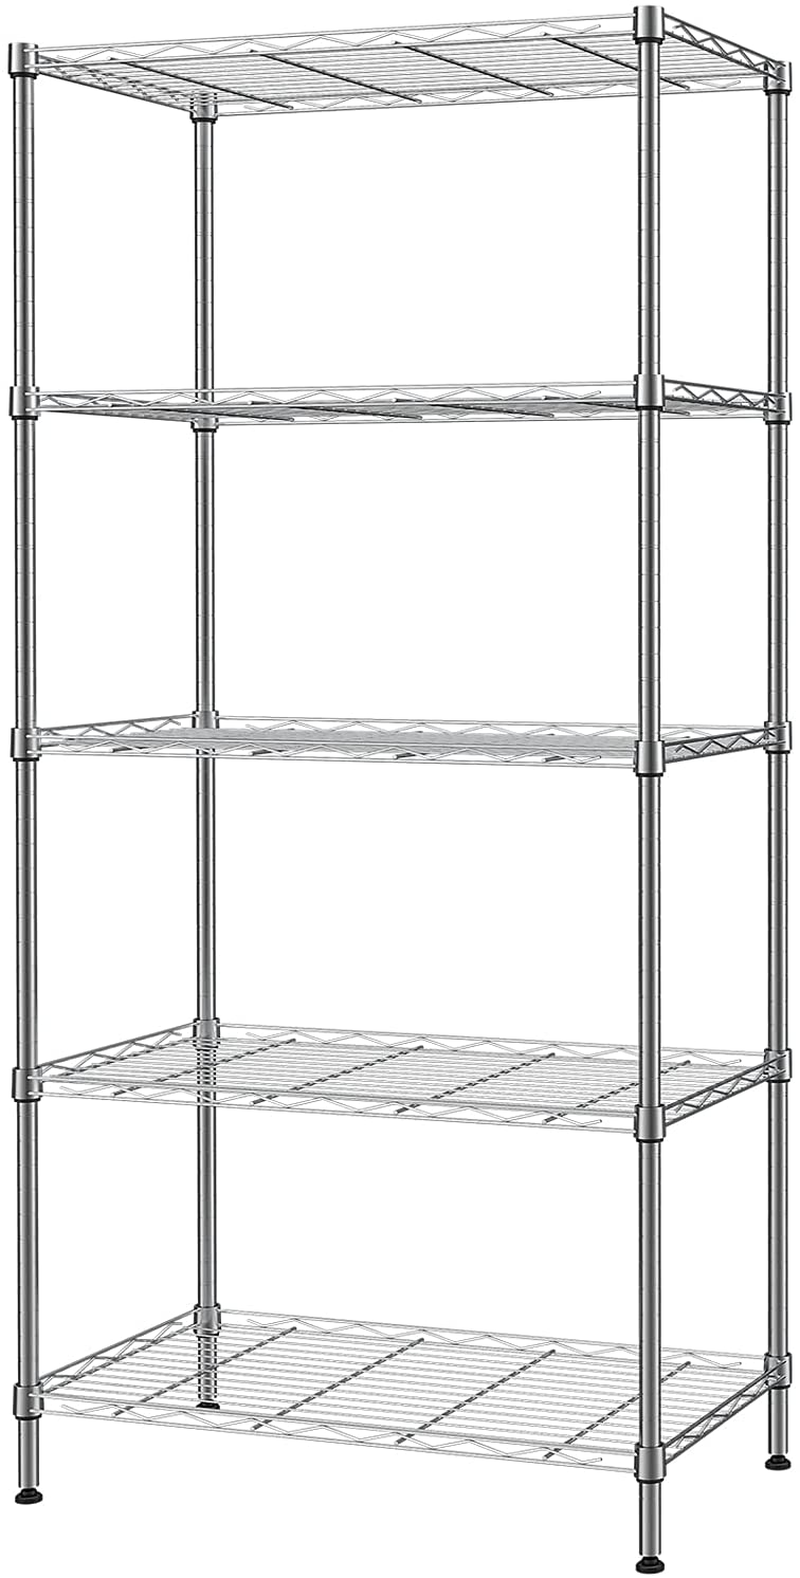 SINGAYE 5 Tier Storage Rack Wire Shelving Unit Storage Shelves Metal for Pantry Closet Kitchen Laundry 660Lbs Capacity 23.6" L x 14" W x 59.1" H Silver Home & Garden > Kitchen & Dining > Food Storage SINGAYE 5 tier  